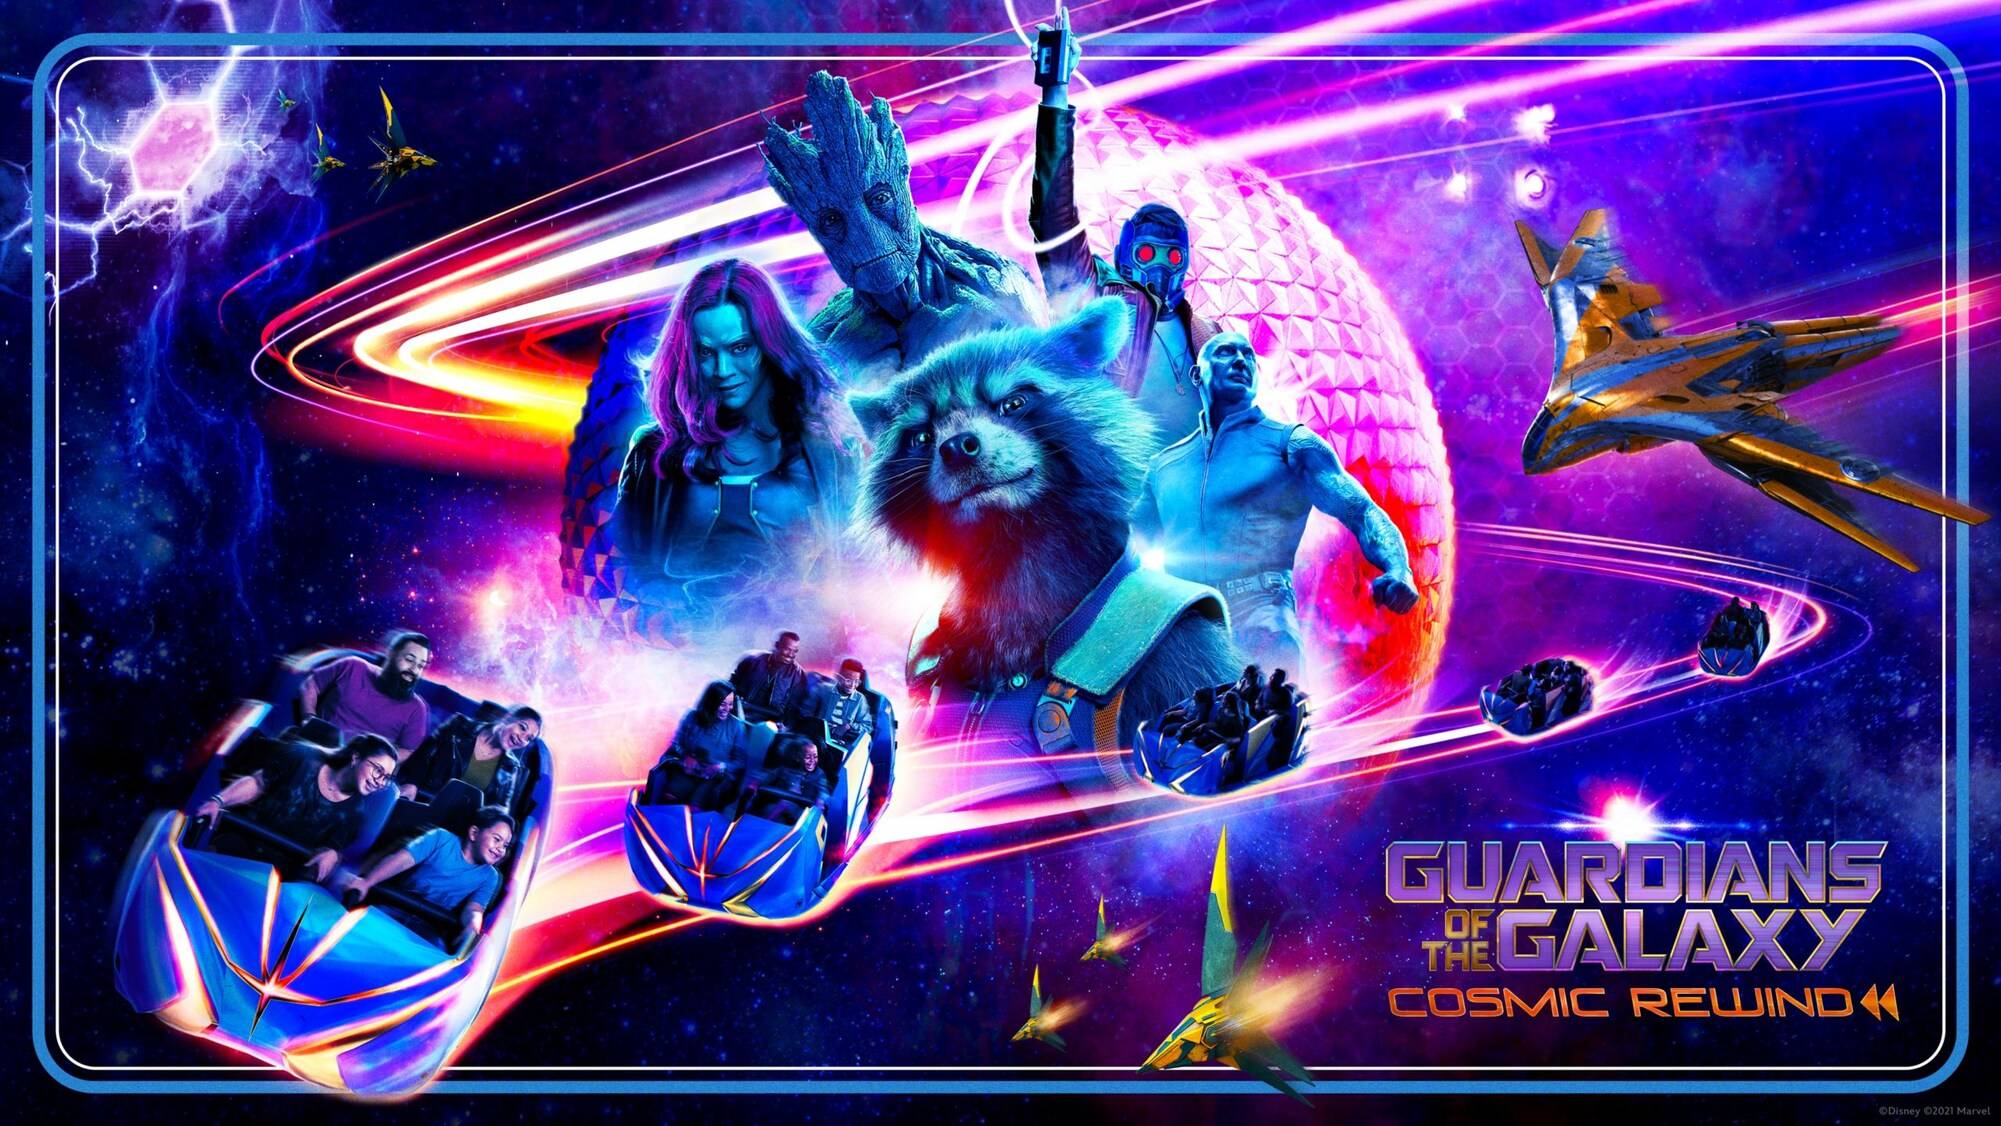 Disney Annual Passholder Park Pass reservations at capacity for Guardians of the Galaxy Cosmic Rewind's May 27 opening